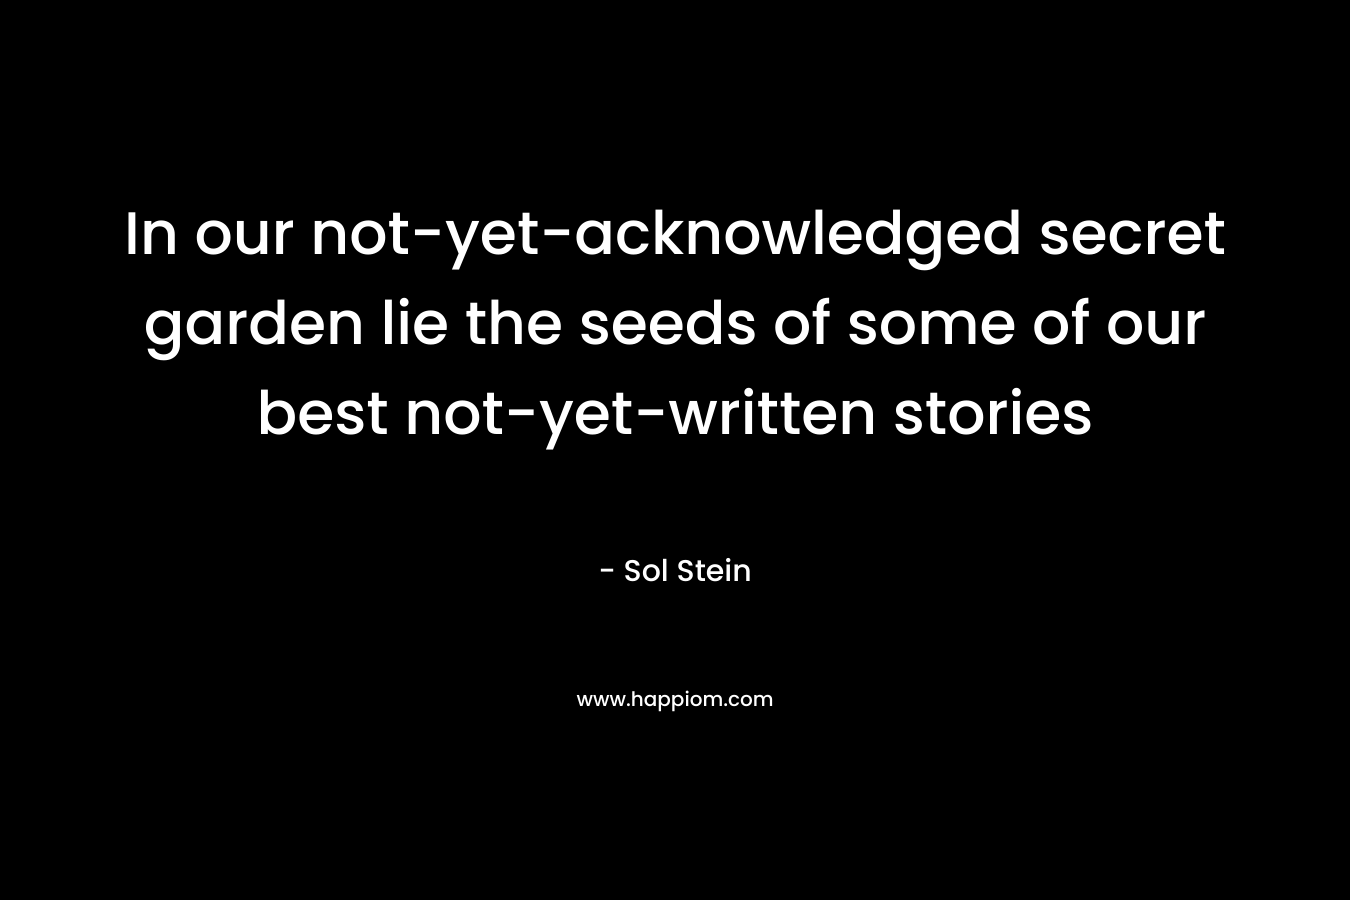 In our not-yet-acknowledged secret garden lie the seeds of some of our best not-yet-written stories – Sol Stein